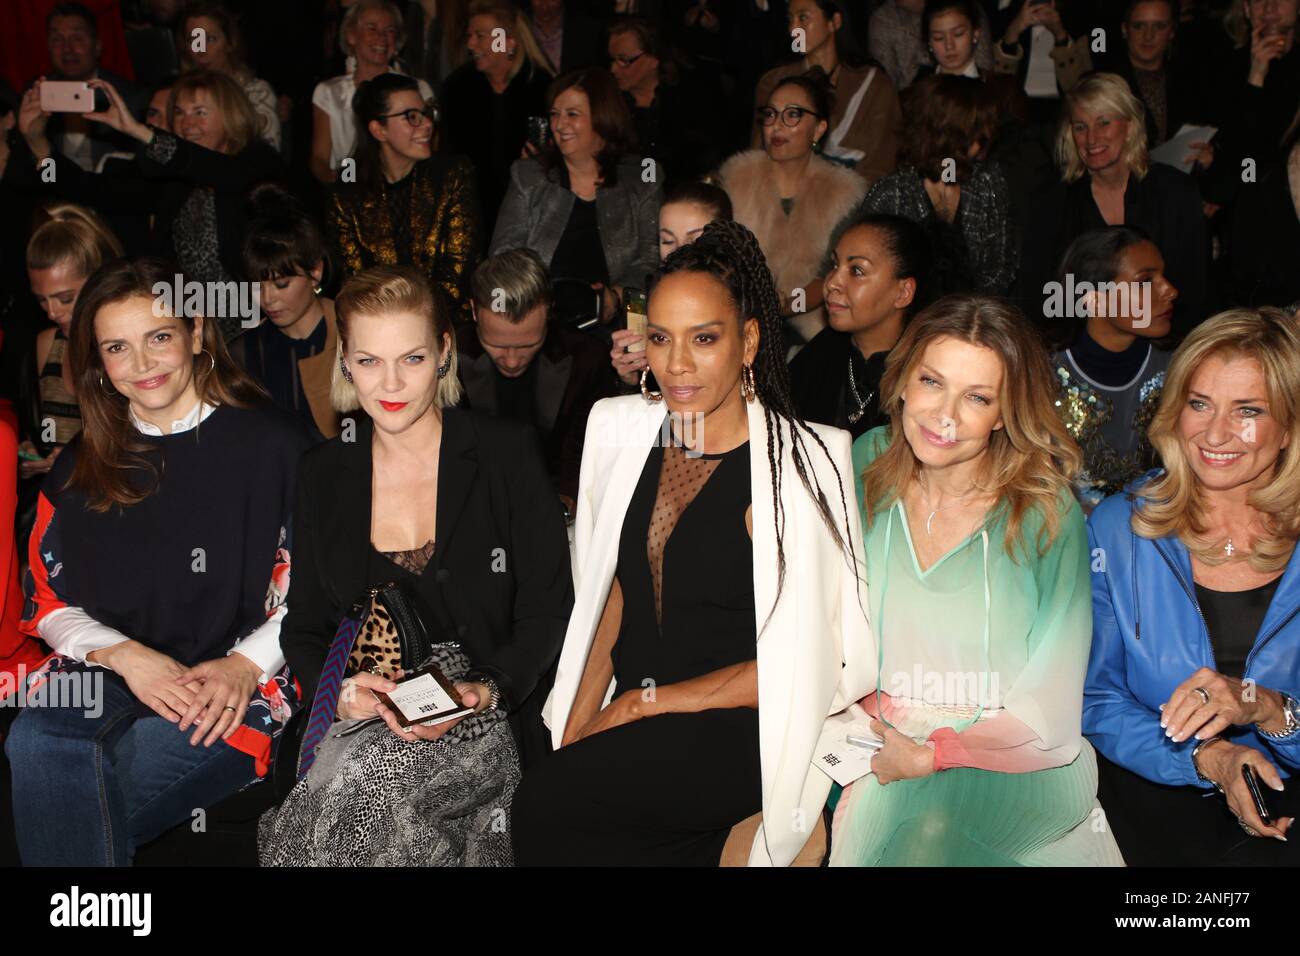 Germany, Berlin, 01/15/2020: (left-right) Rebecca Immanuel, Anna Loos, Barbara Becker, Ursula Karven and Dagmar Woehrl  attend the Riani show during Berlin Fashion Week Autumn/Winter 2020 at Kraftwerk Mitte on January 15, 2020 in Berlin, Germany. Stock Photo